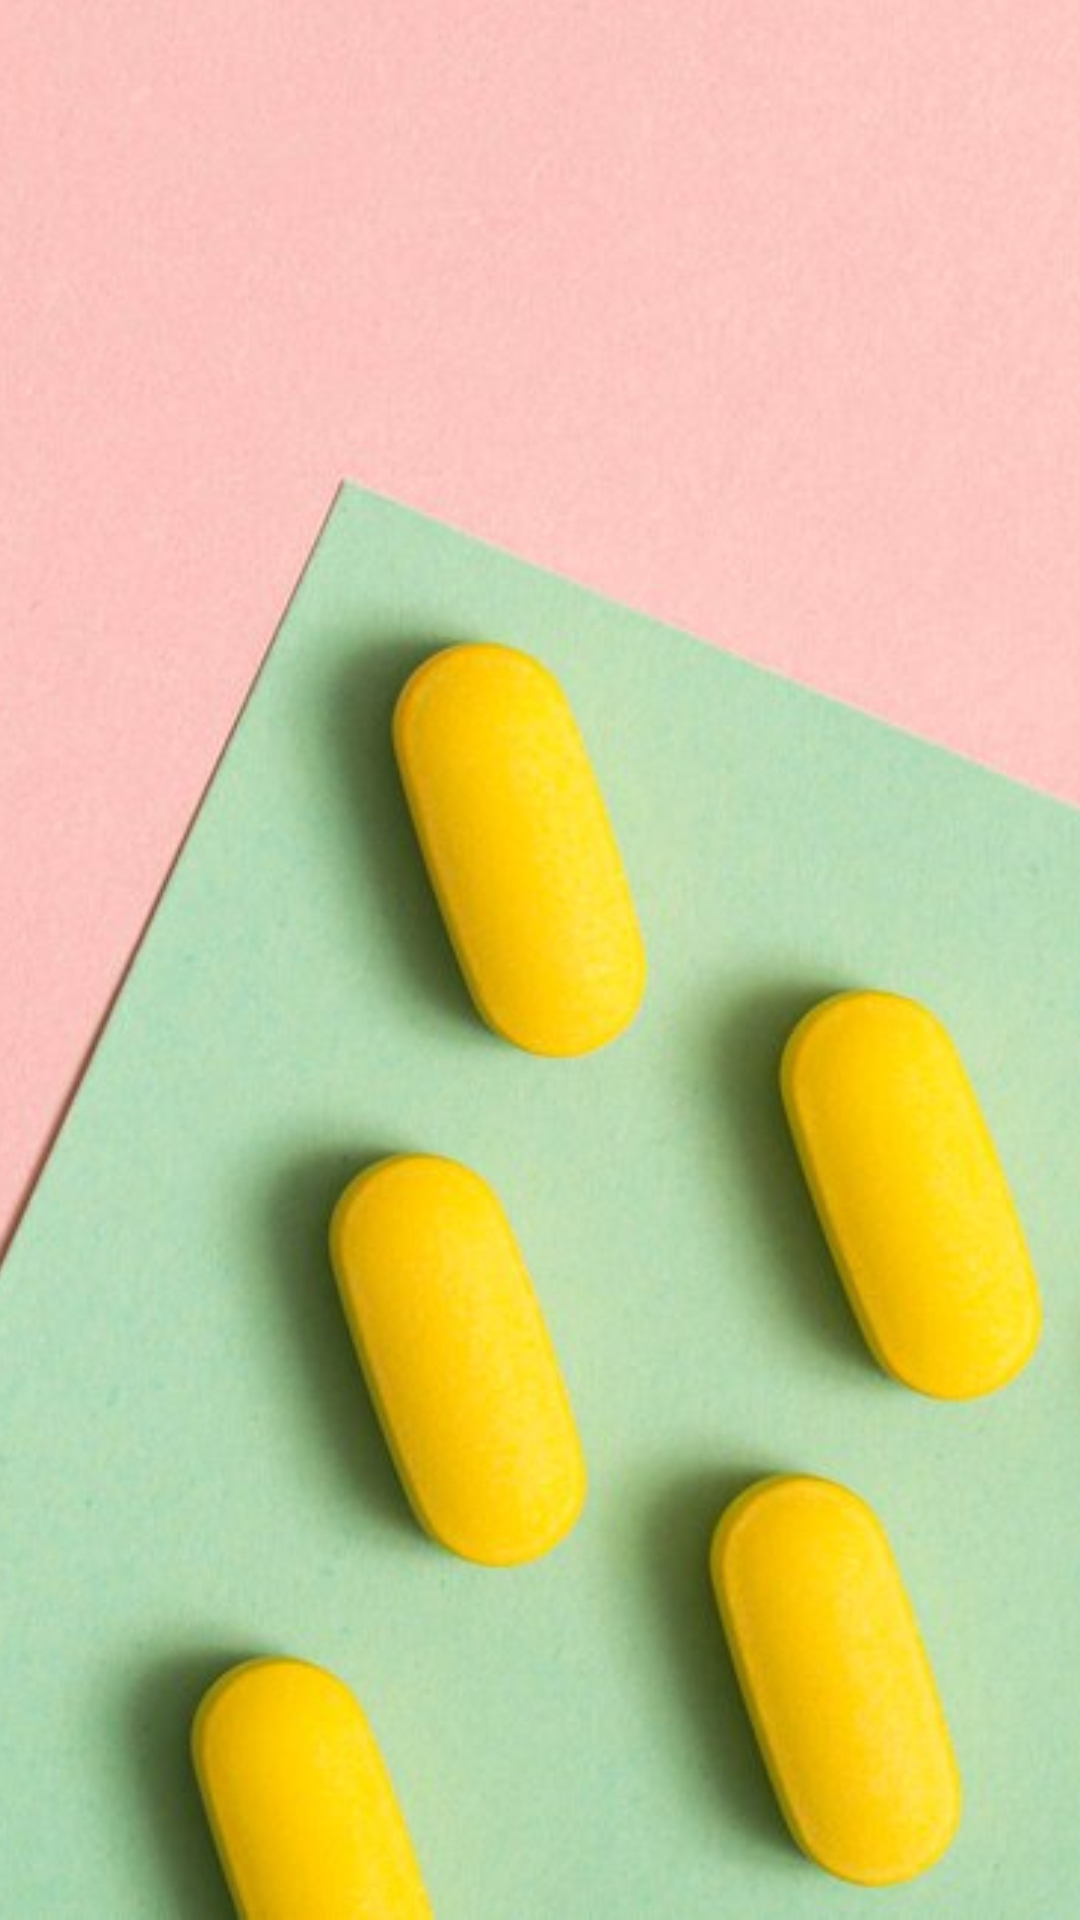 Must-have vitamins for a fit and active lifestyle